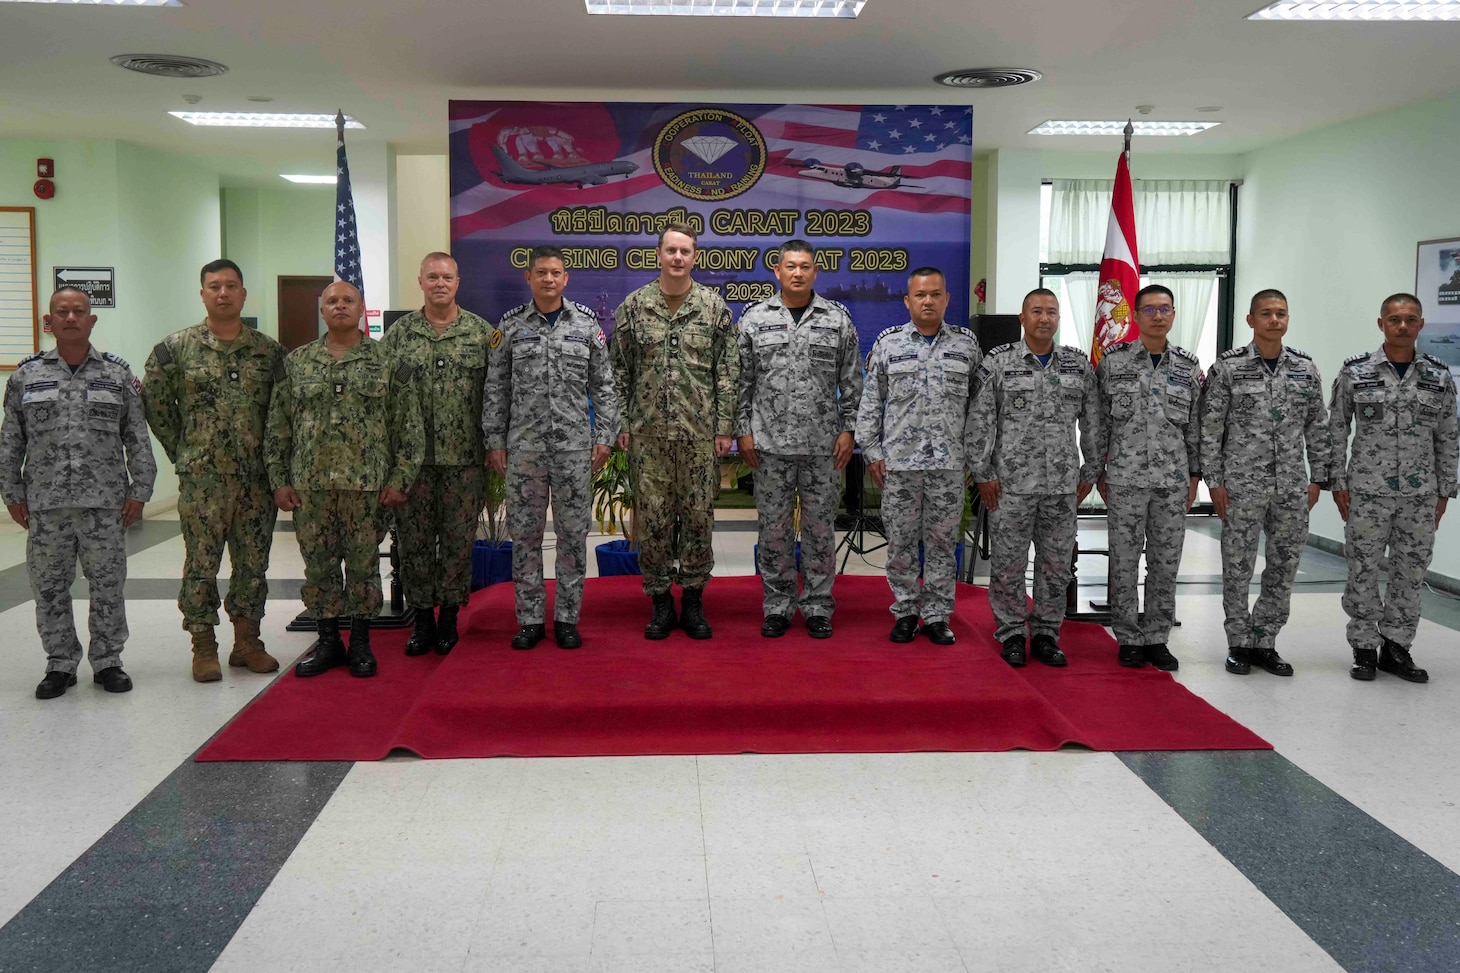 U.S. and Royal Thai Navy Sailors pose for a photo during the closing ceremony of Cooperation Afloat Readiness and Training (CARAT)/Marine Exercise (MAREX) Thailand 2023 at Royal Thai Fleet Headquarters, May 15. CARAT/MAREX Thailand is a bilateral exercise between the Kingdom of Thailand and United States to promote regional security cooperation, practice humanitarian assistance and disaster relief, and strengthen maritime understanding, partnerships and interoperability. Thailand has been part of the CARAT exercise series since 1995. In its 29th year, the CARAT series is comprised of multinational exercises, designed to enhance U.S. and partner forces’ abilities to operate together in response to traditional and non-traditional maritime security challenges in the Indo-Pacific region.